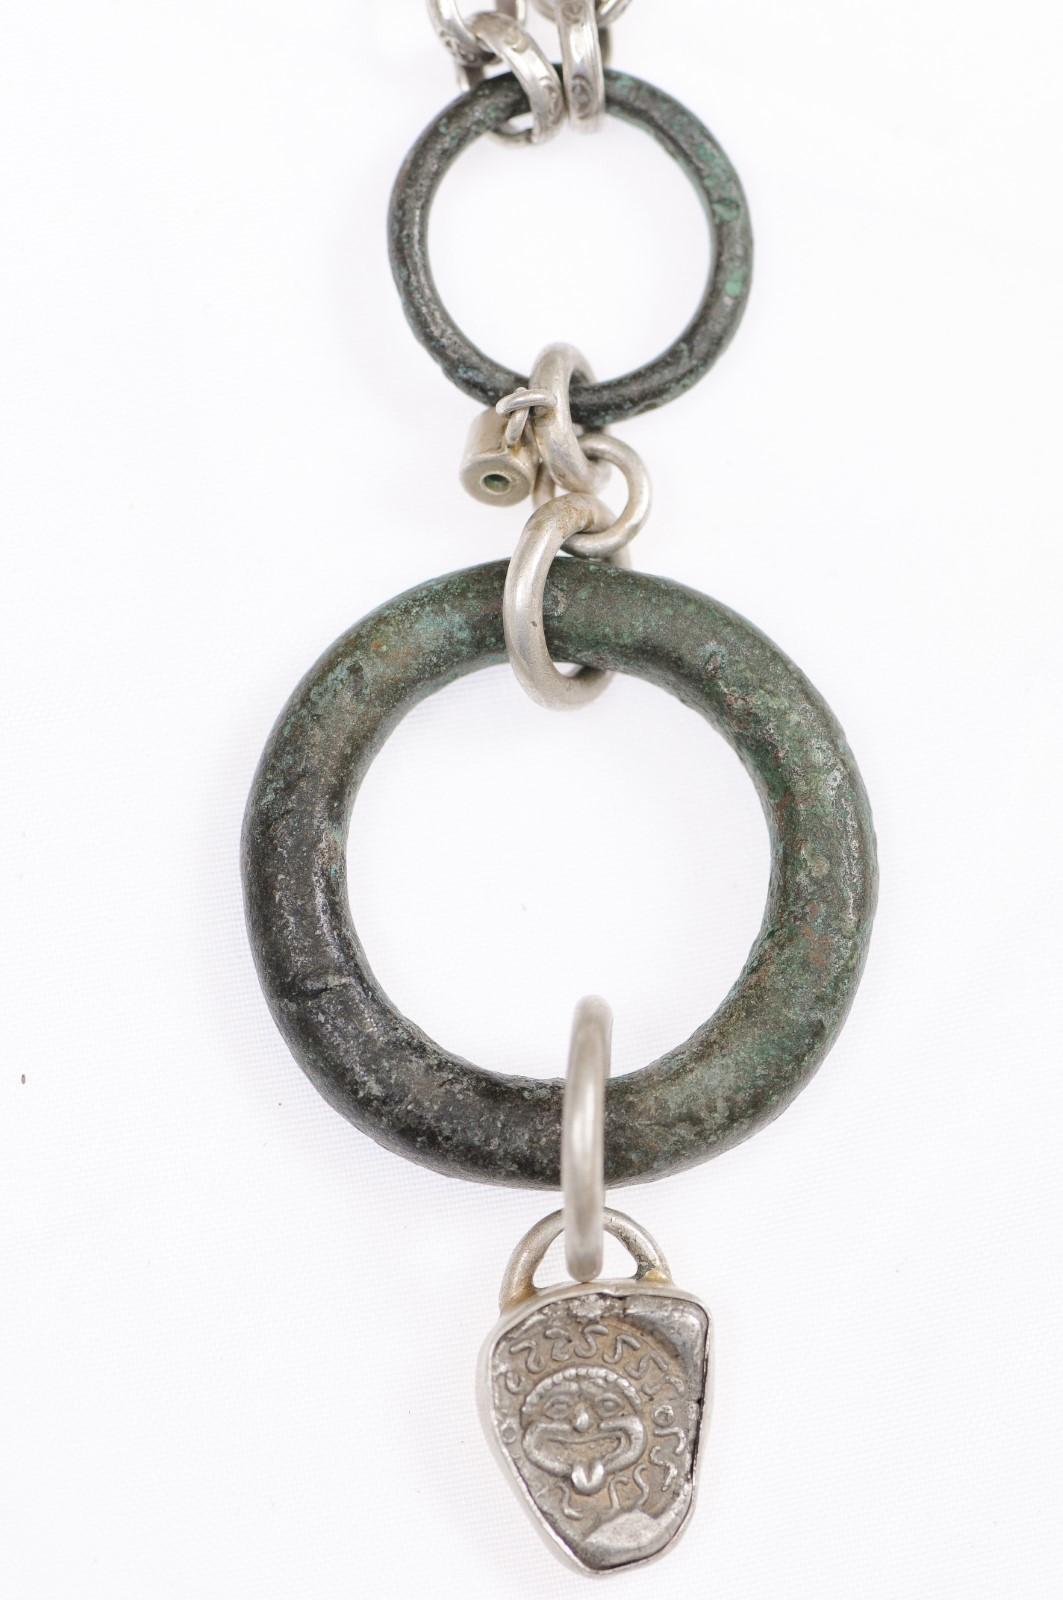 Tiered Pendant in bronze, w/emerald and drachm (coin) on Sterling Silver Chain For Sale 4